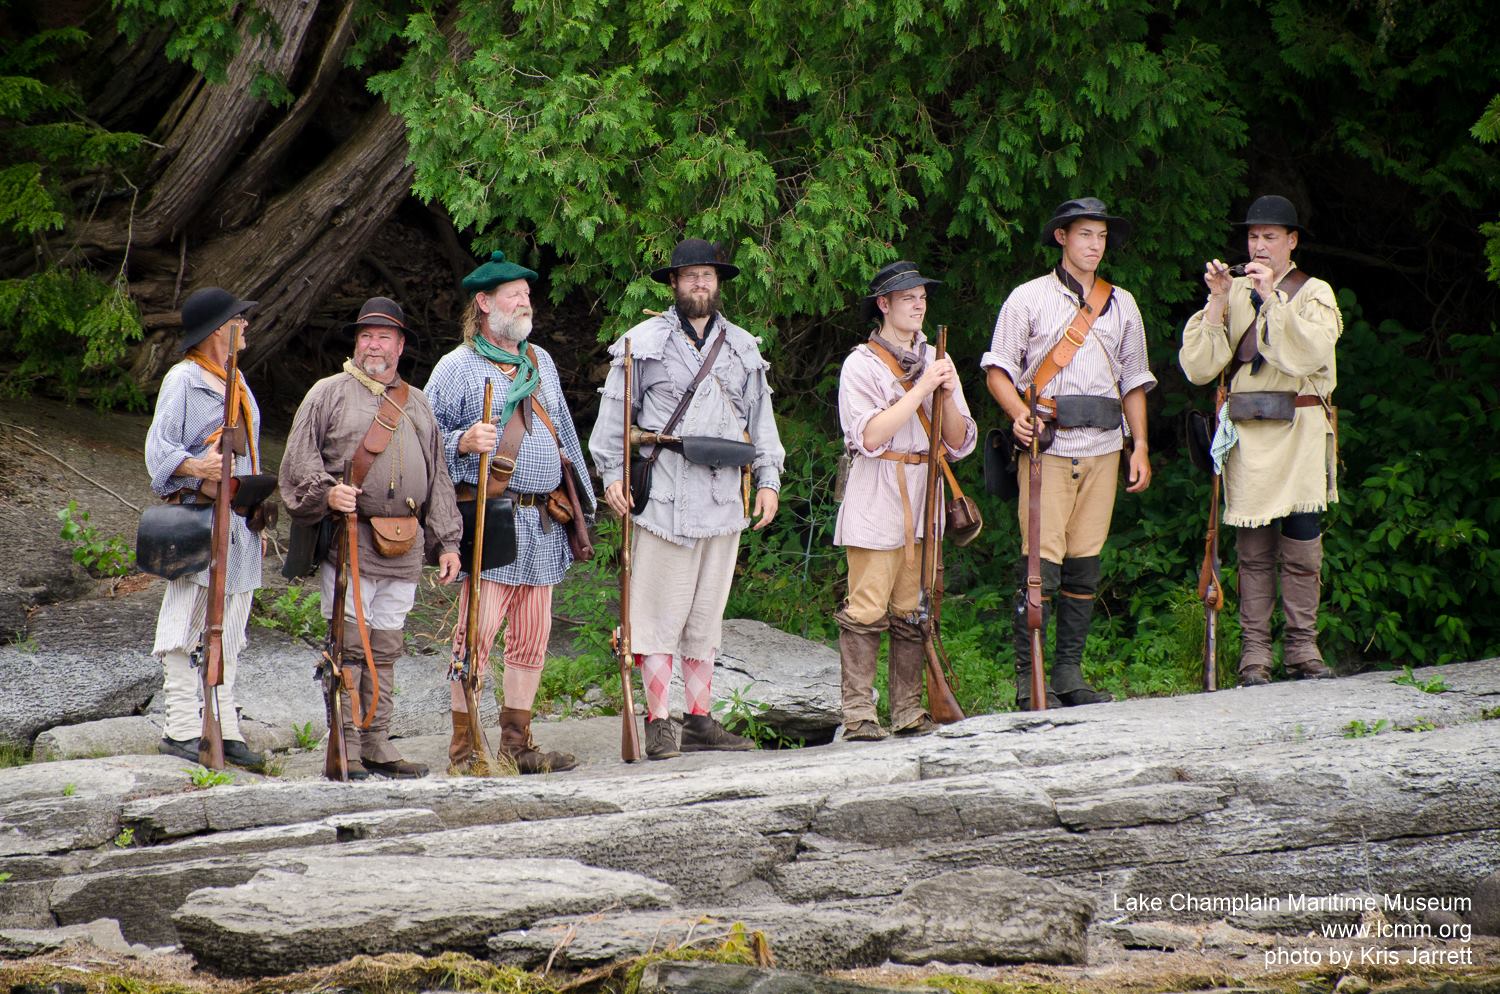 The Lake Champlain Maritime Museum continues to re-enact "Rabble in Arms" that inspired Cipperly as a young girl. Photo: Lake Champlain Maritime Museum